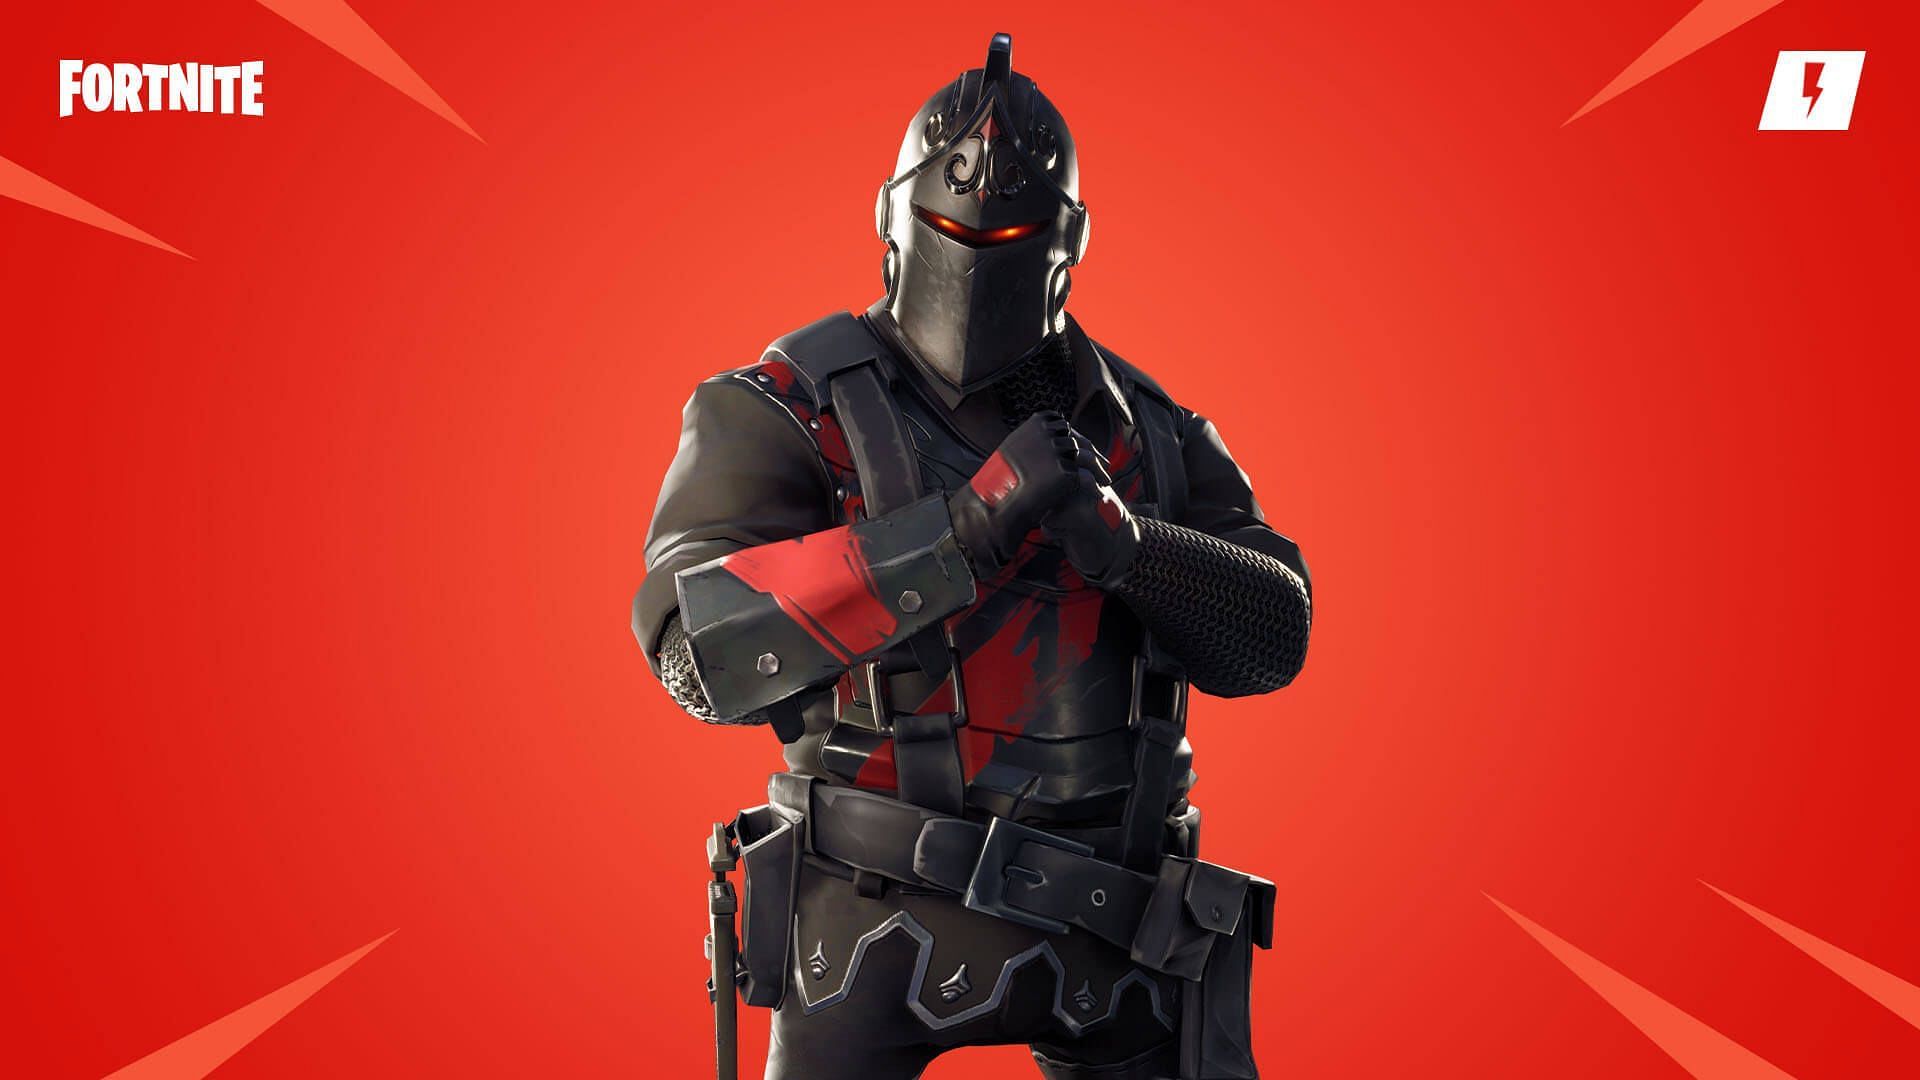 Black Knight is one of the rarest skins in Fortnite, making it highly desirable if it comes back to the item shop (Image via Epic Games)